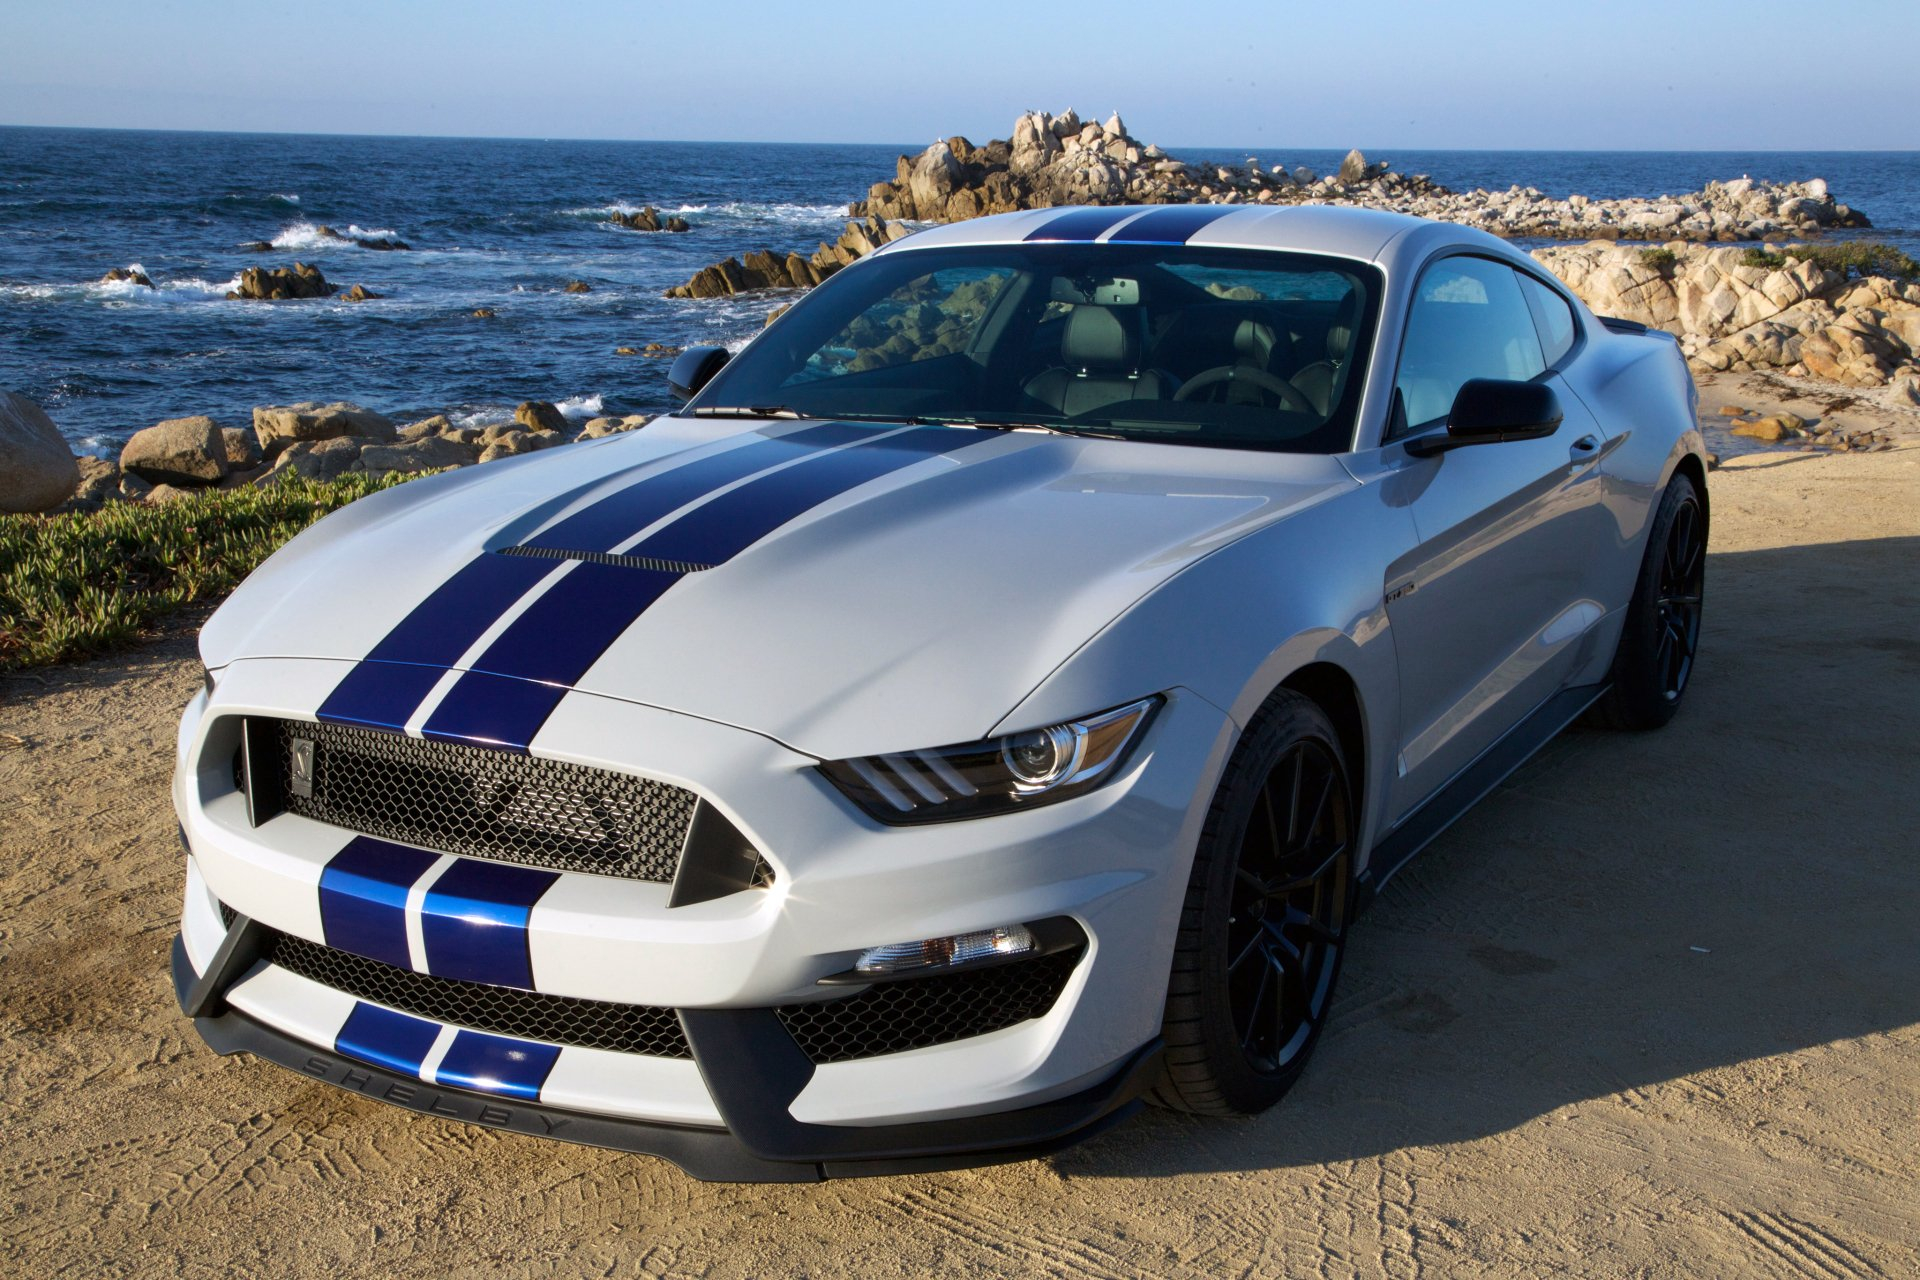 1920x1280 10+ Ford Mustang Shelby GT350 HD Wallpapers and Backgrounds